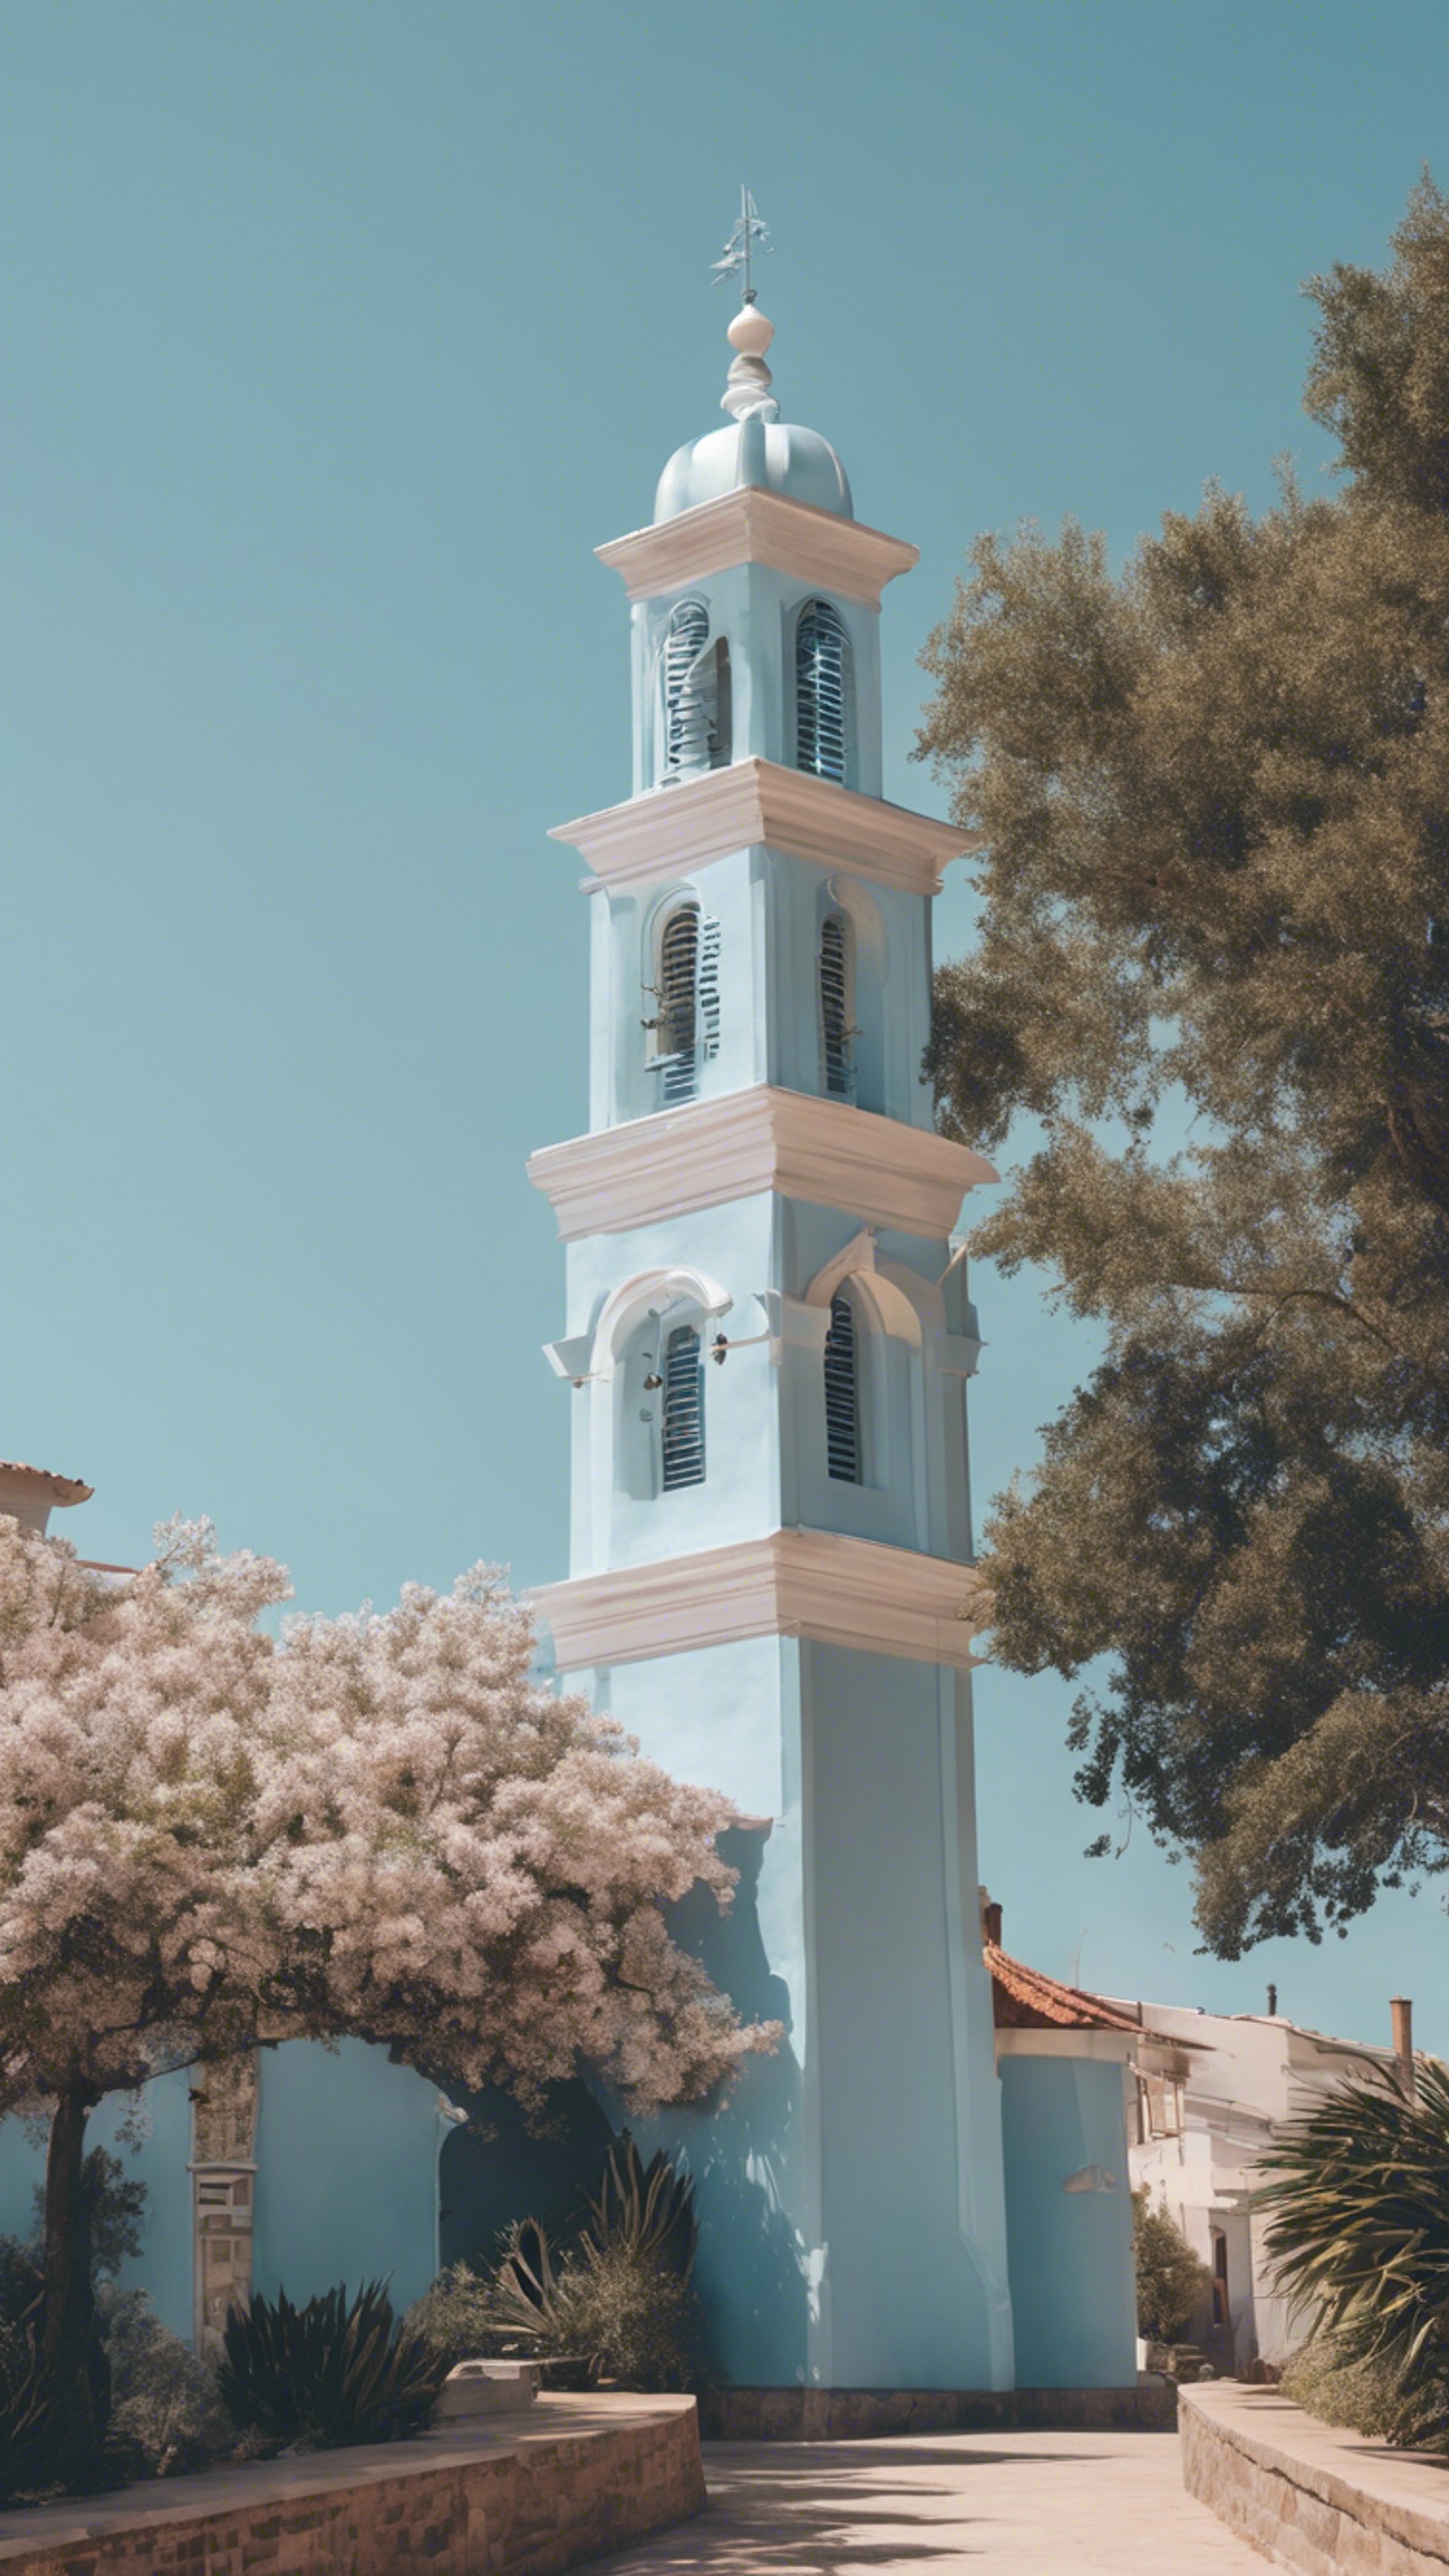 A stately pastel blue bell tower against a clear, sunny sky in a coastal town.壁紙[a05c52dcc3054b35b6be]